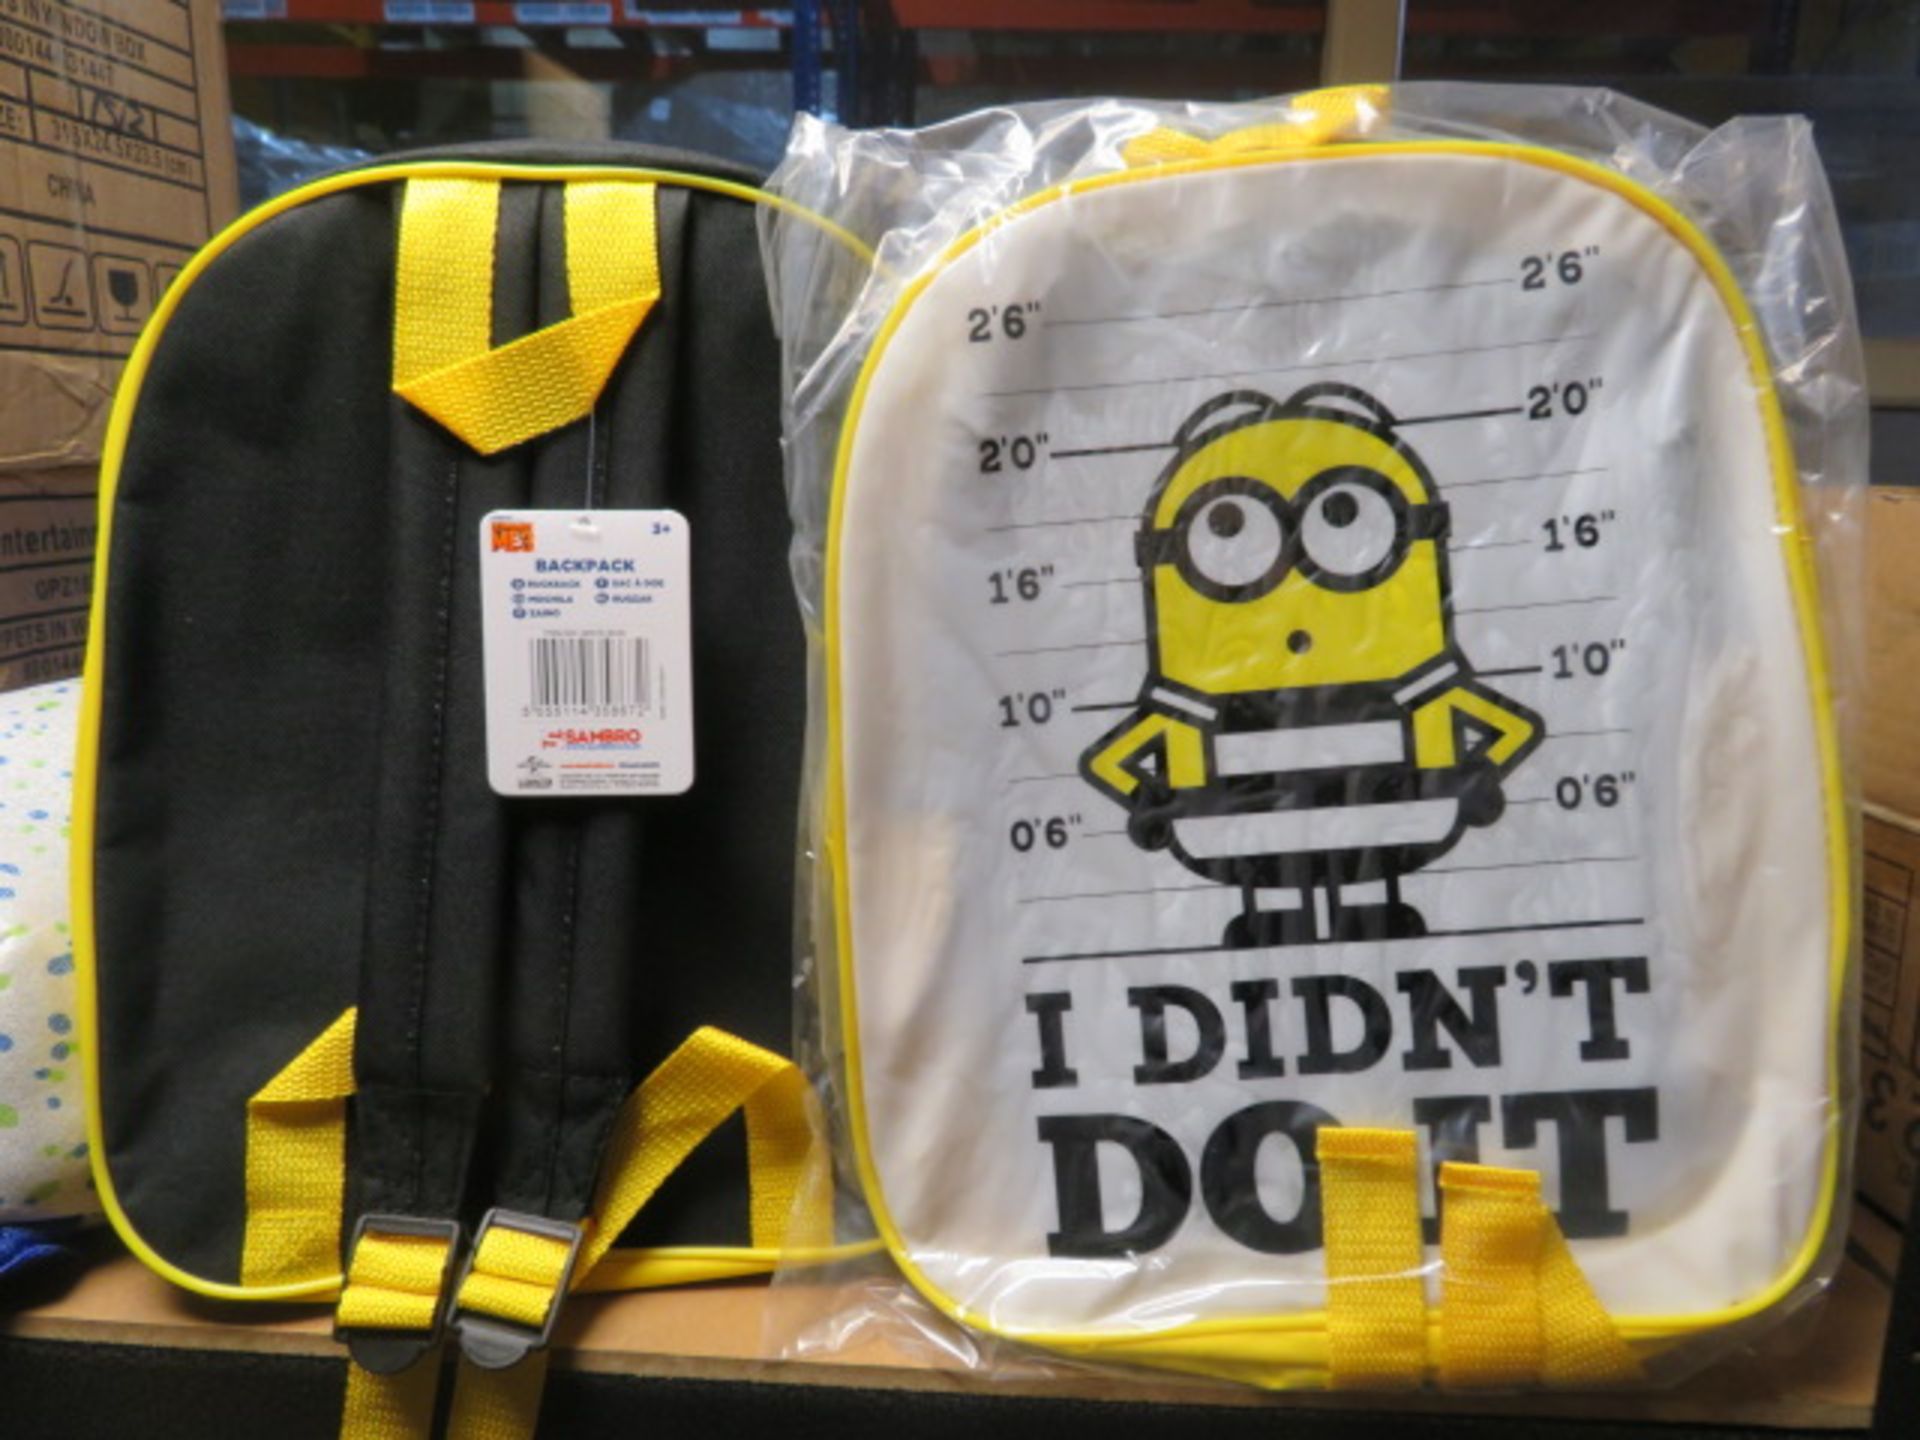 24 x DESPICABLE ME MINIONS 'I DIDN'T DO IT' JUNIOR BACK PACKS